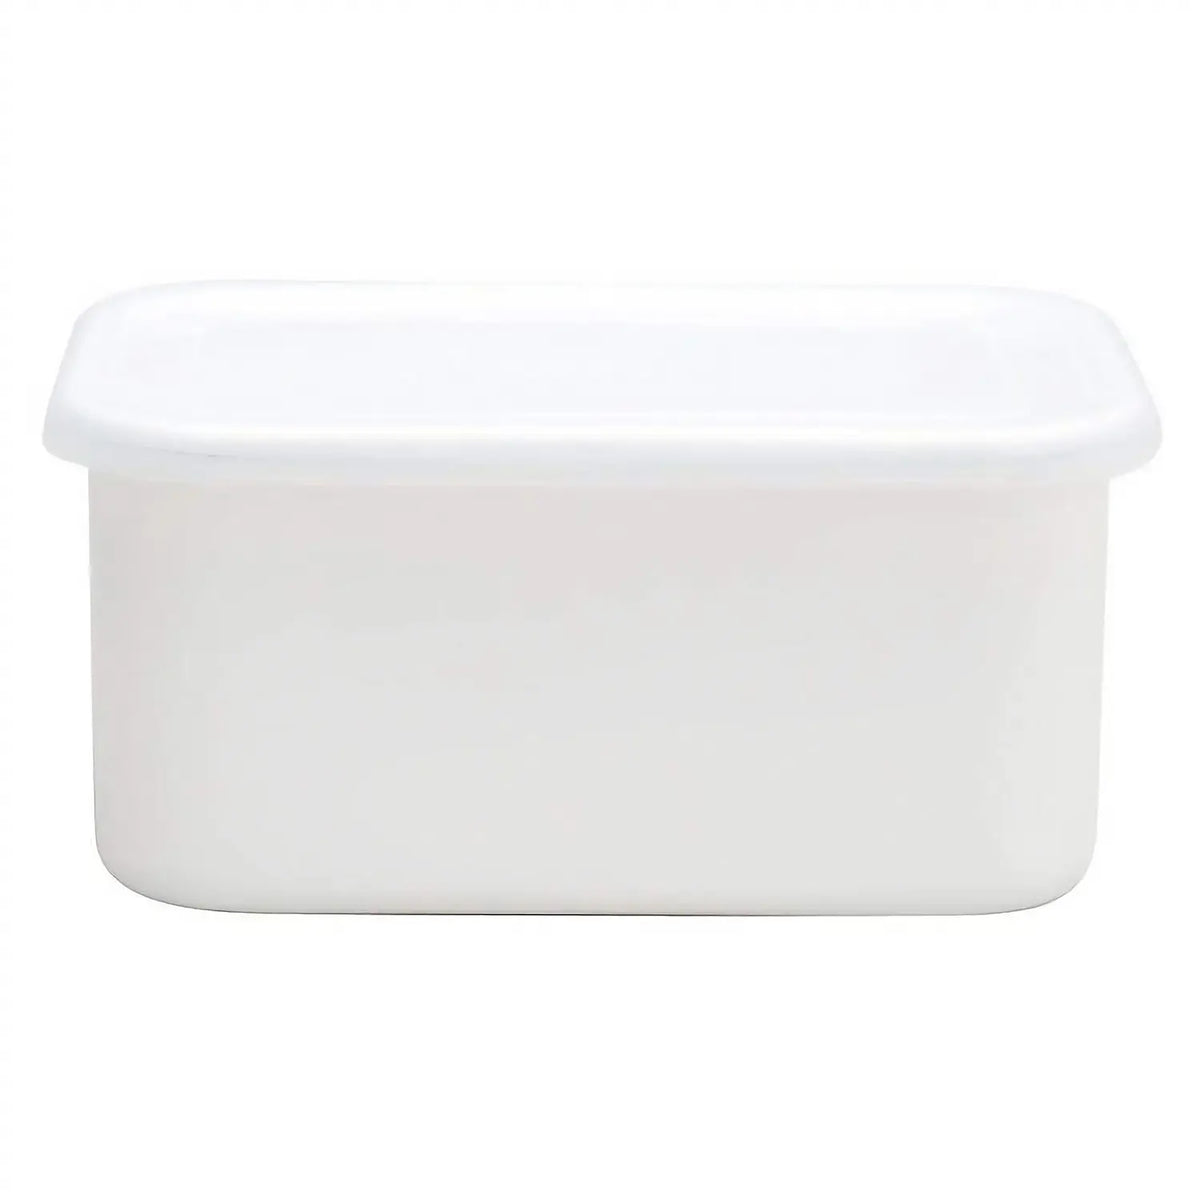 Noda Horo White Series Enamel Rectangle Deep Food Containers with Lid